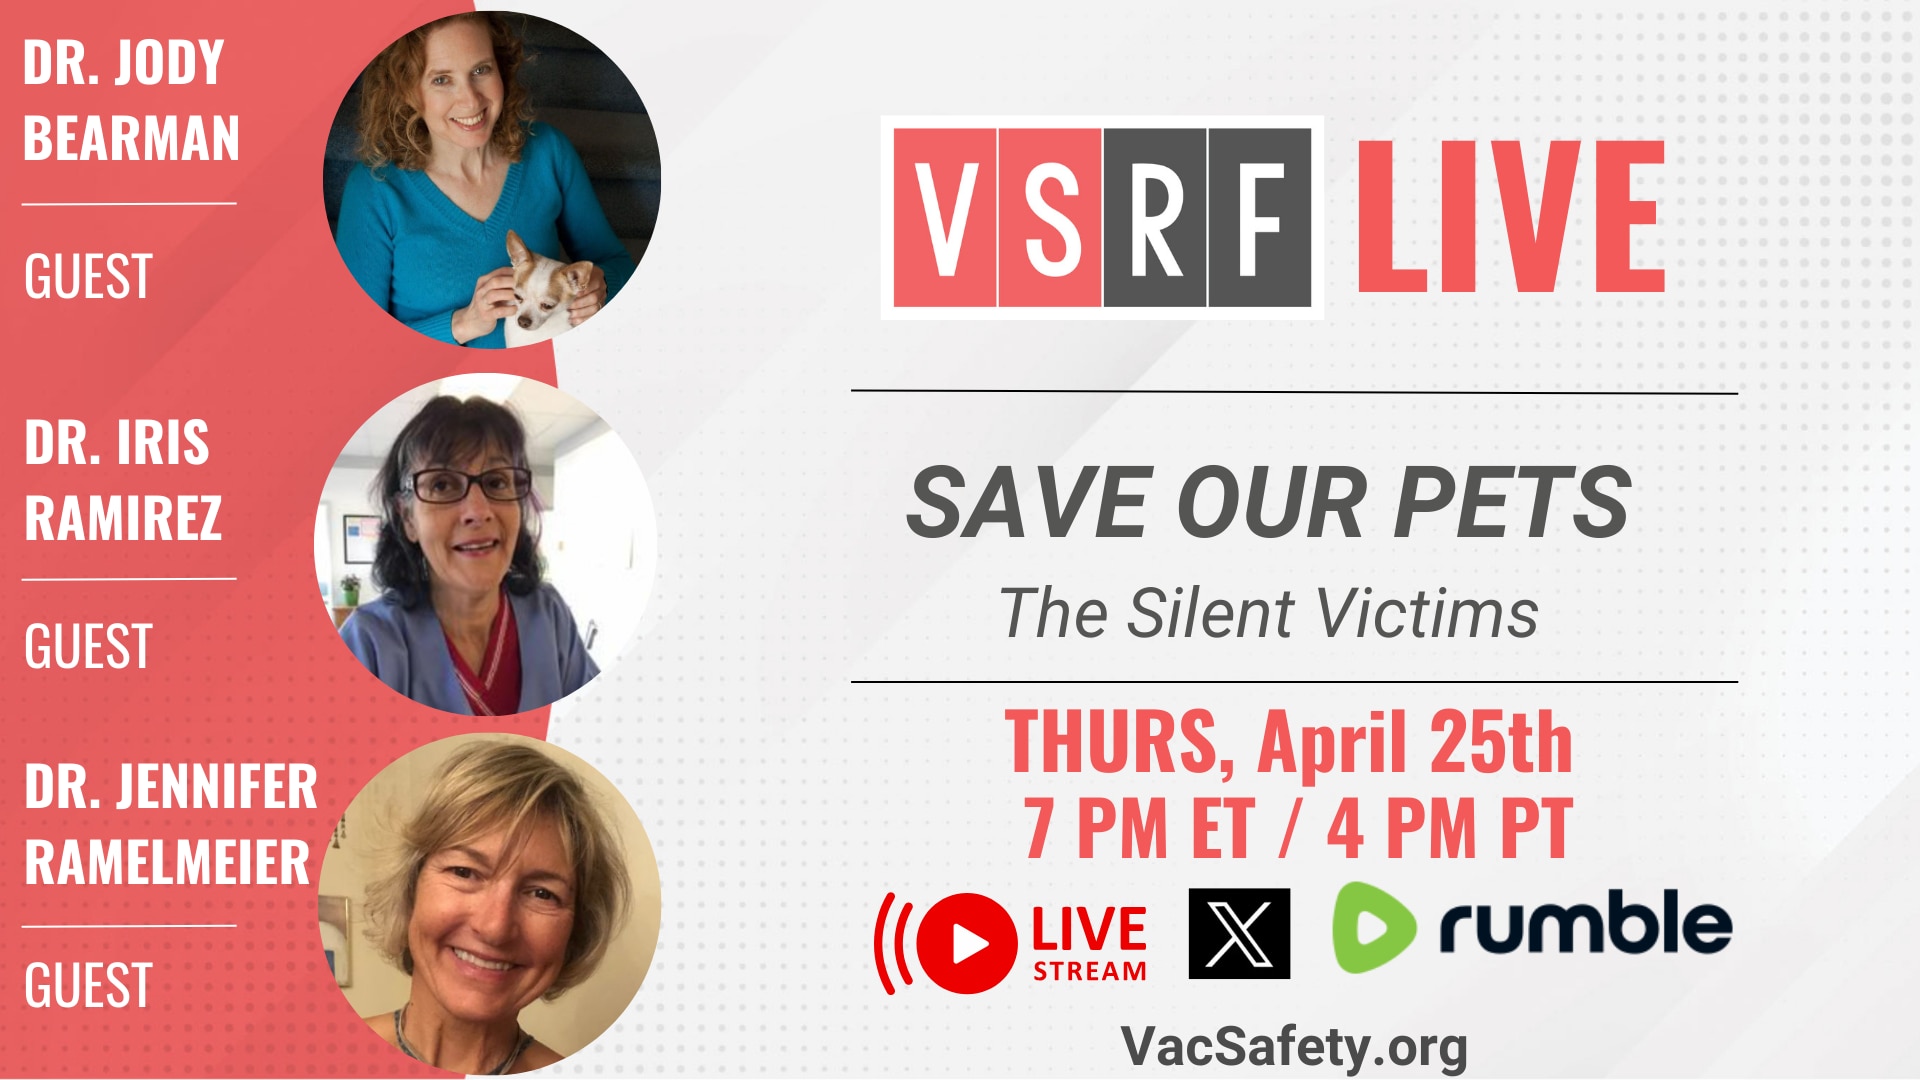 Have you ever considered what the medical industrial complex is doing to our pets? Then you will not want to miss this week's VSRF Live!  Steve will sit down with a panel of experienced veterinarians including Dr. Jody Bearman, Dr. Iris Ramirez and Dr. Jennifer Ramelmeier, all of whom are familiar with the questionable if not downright cruel treatment of pets and other animals in the name of “health”. From unnecessary vaccines to big pharma drug trials, our pets are many times used in various unethical and inhumane ways in order to further the greater goals of the medical industrial complex. Animals truly are the silent victims of big medicine’s insatiable greed for ever greater profits.  Please join us and bring an animal loving friend.  